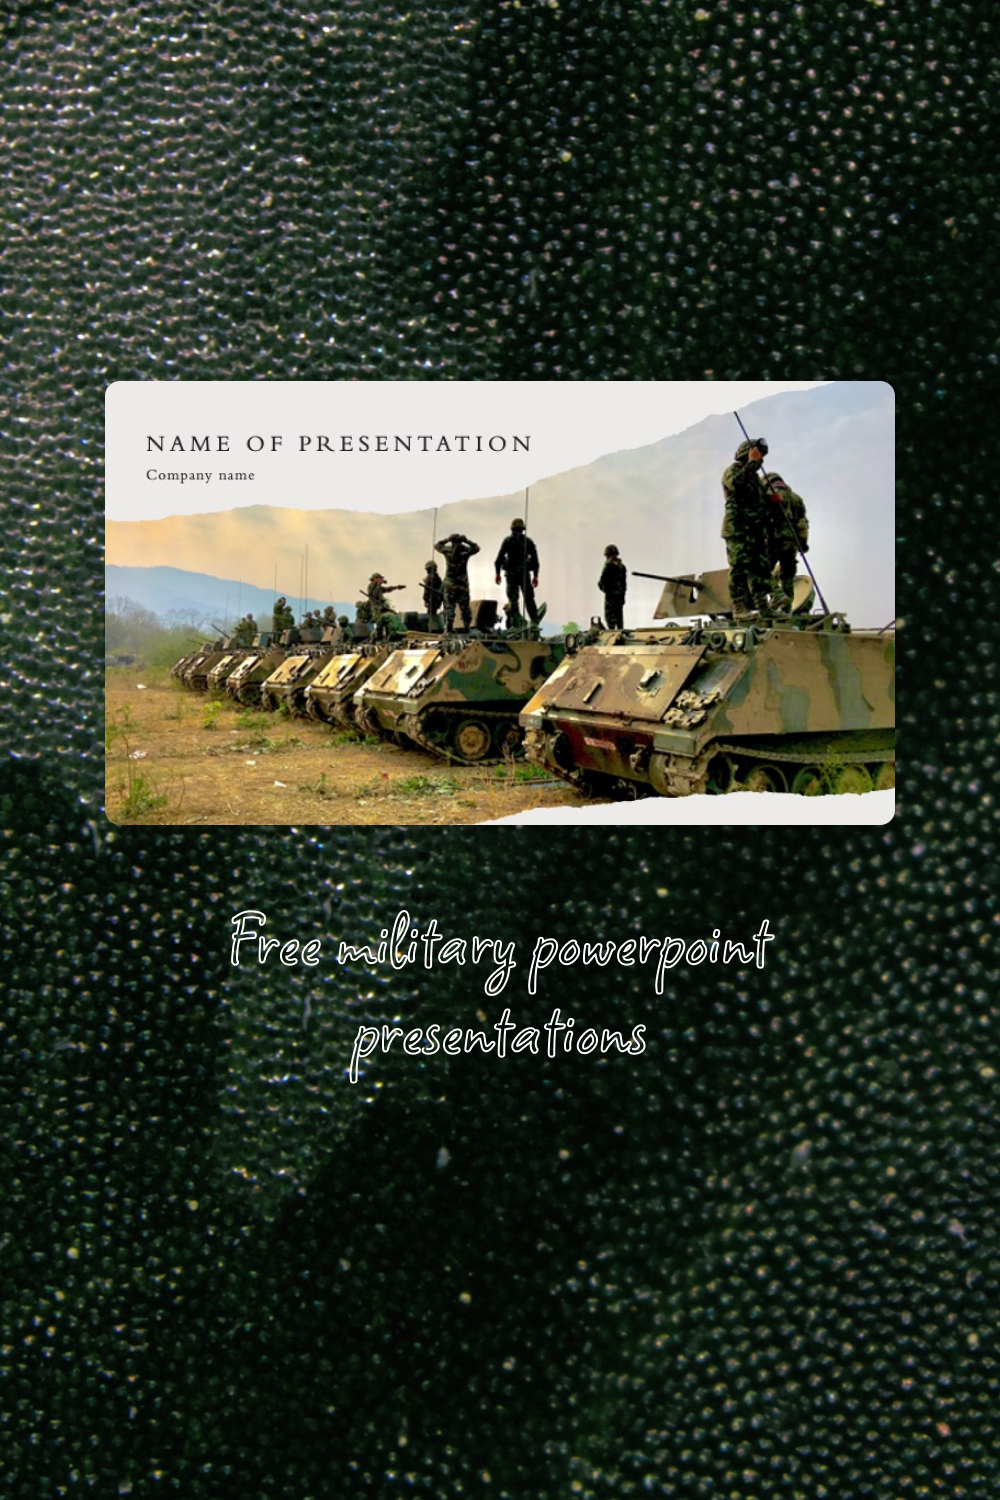 Military powerpoint presentations of pinterest.